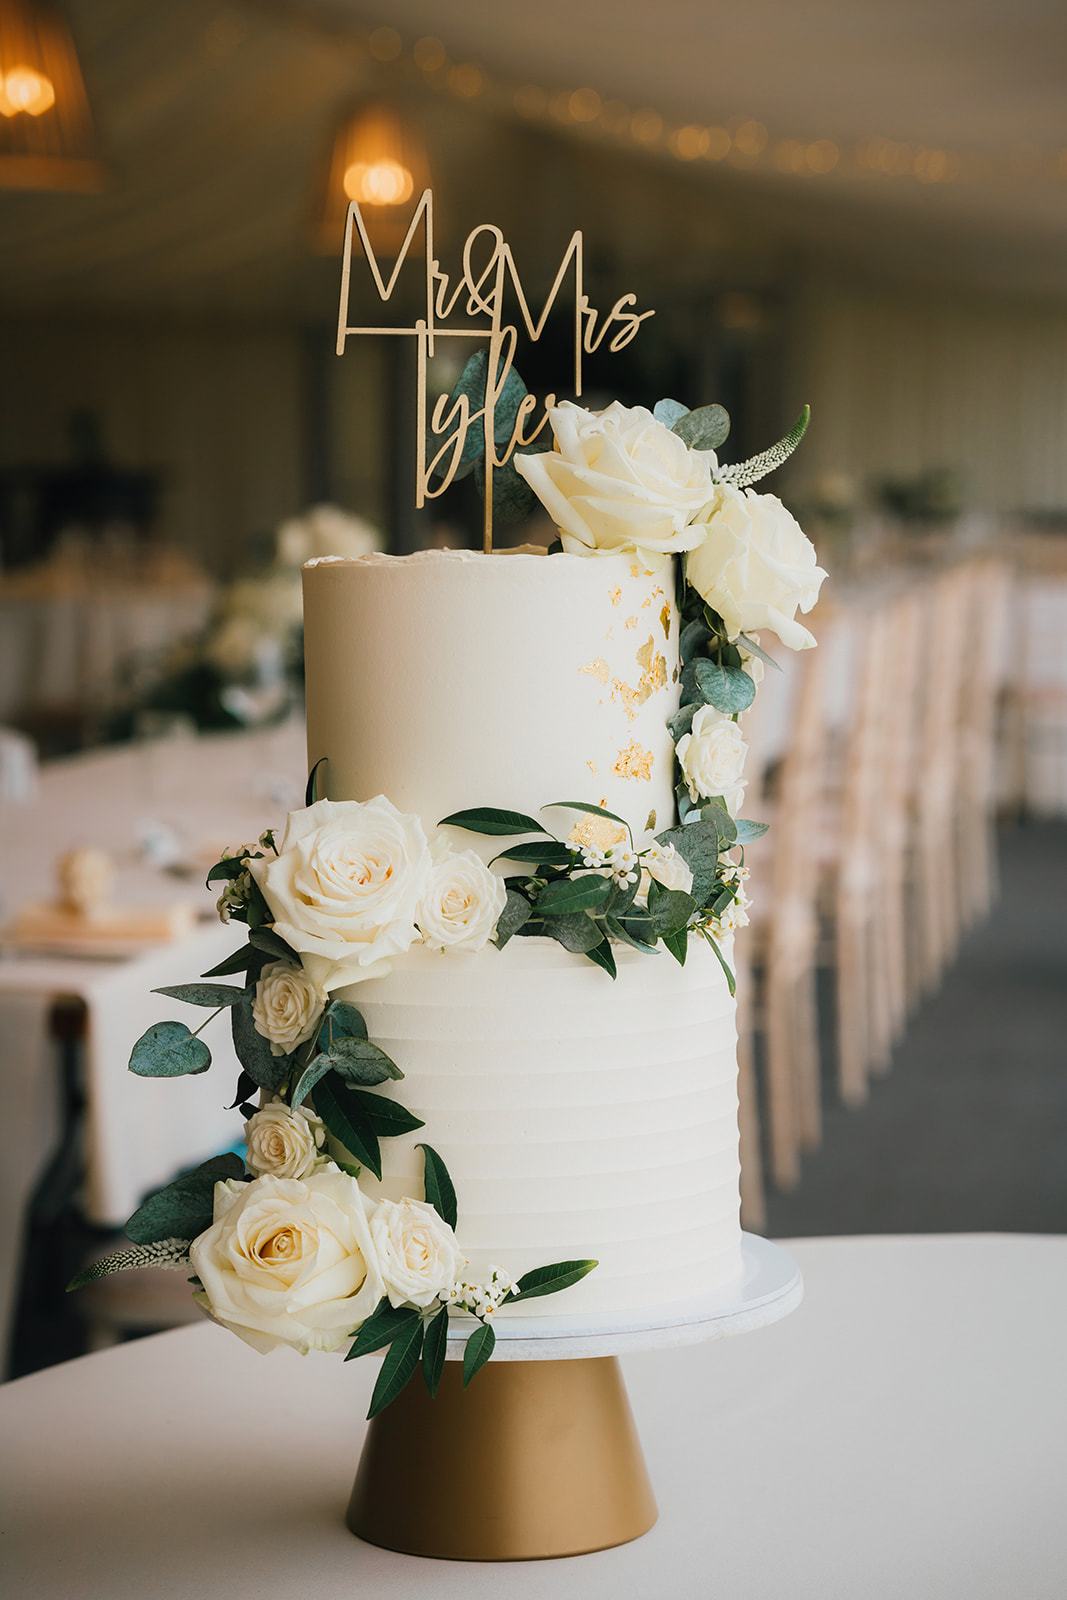 W three tiered wedding cake with a Mr and Mrs sign on the top